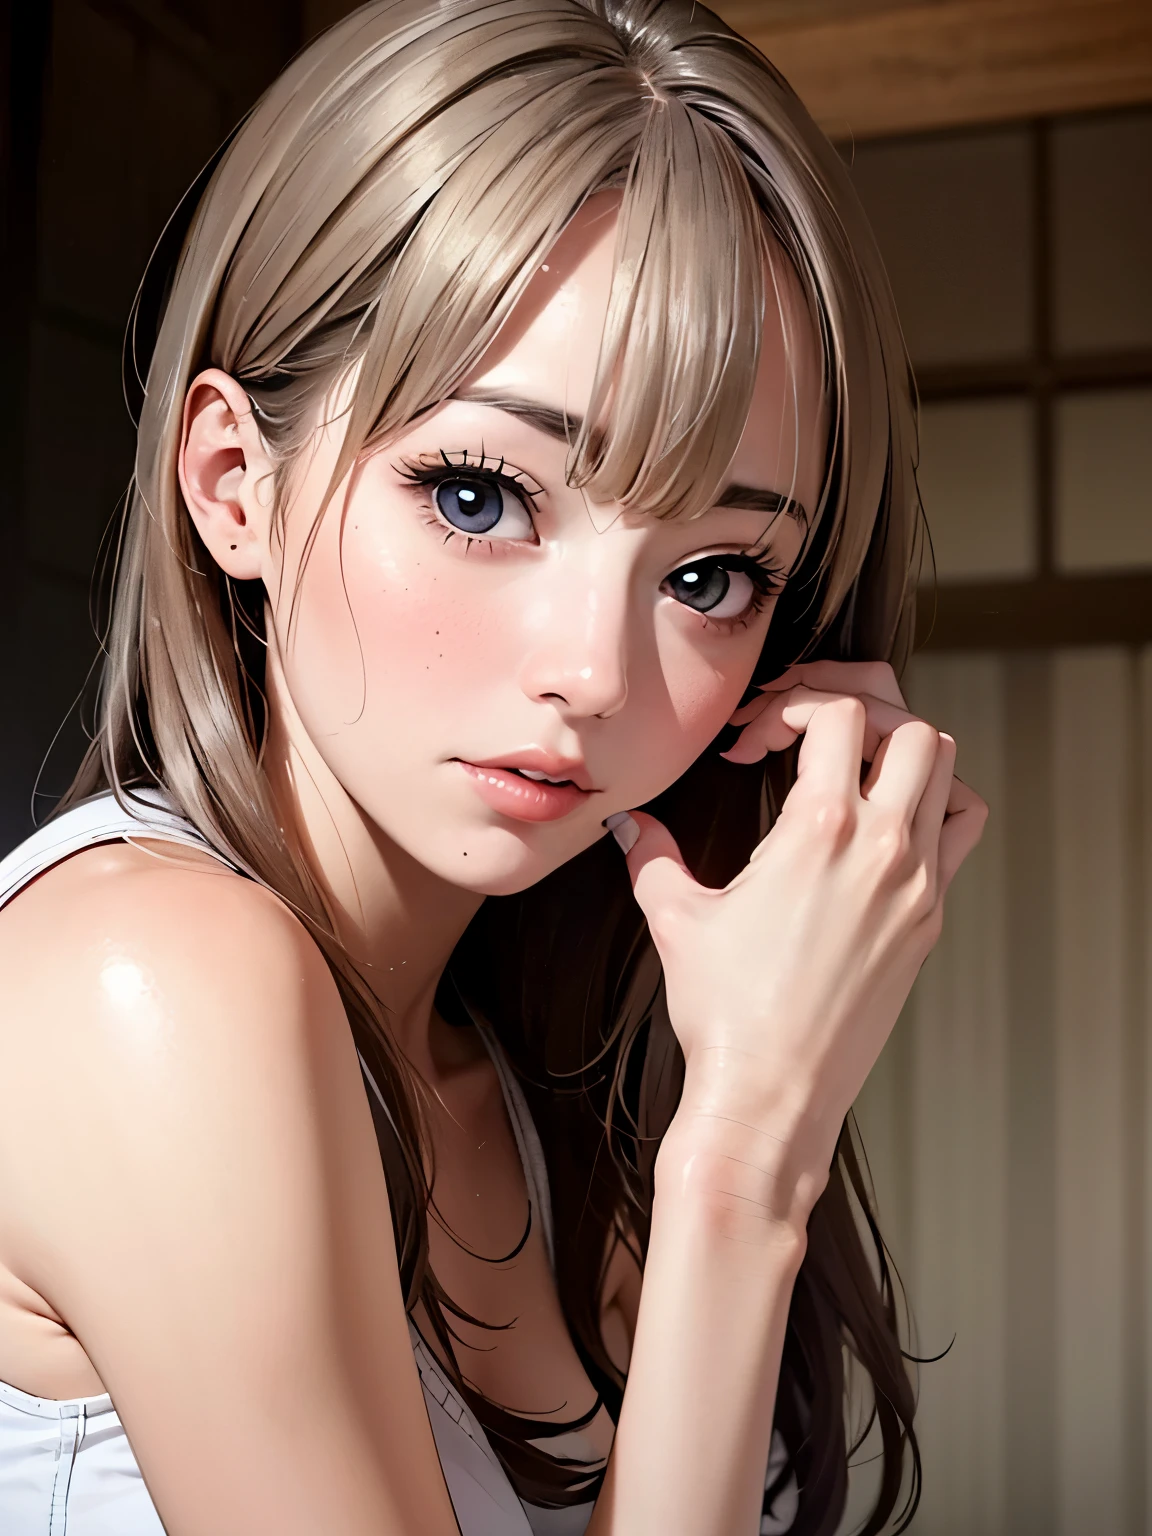 ((masterpiece, highest quality, Super fine, High resolution)), alone, beautiful girl, shining eyes, perfect eyes, 15 years old, 5 fingers on hand, Silver theme,